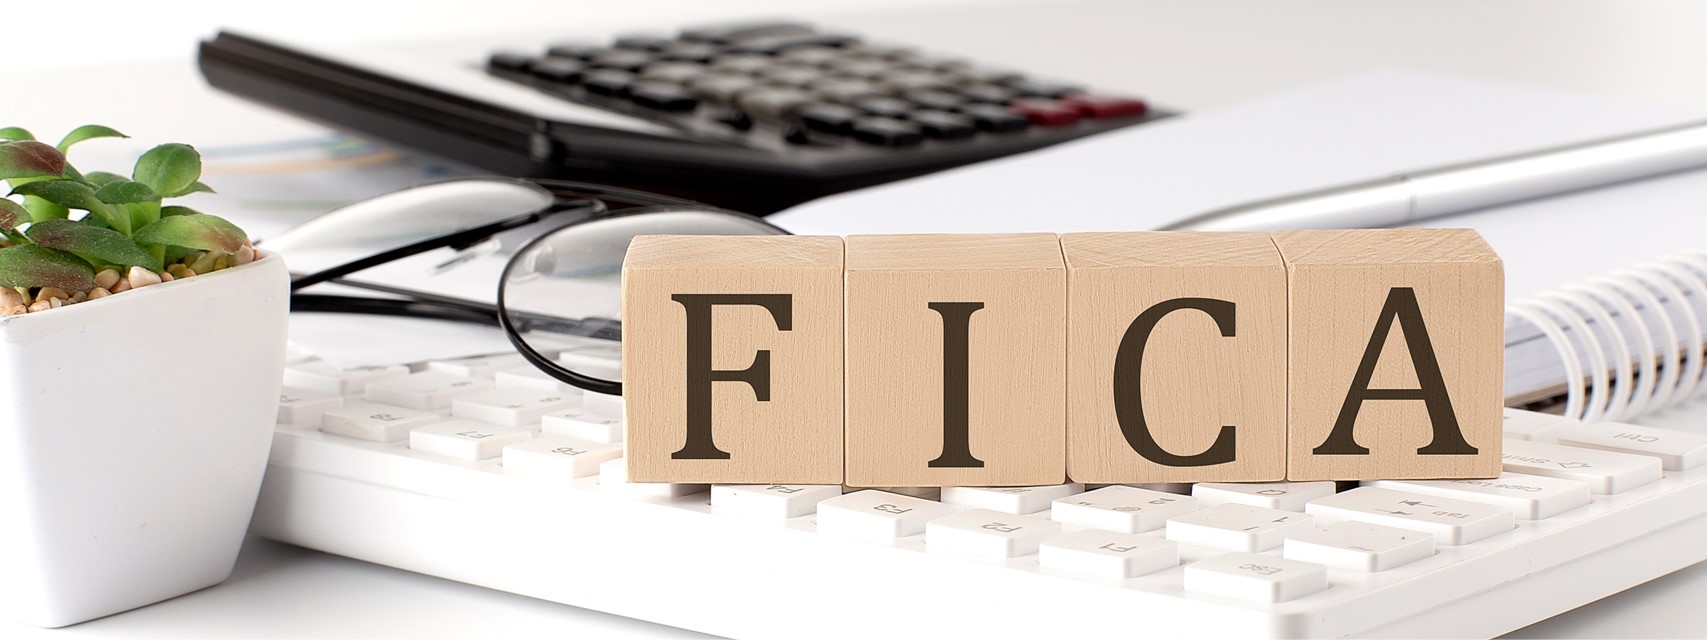 Wooden blocks spelling out "FICA" on computer keyboard with calculator in background